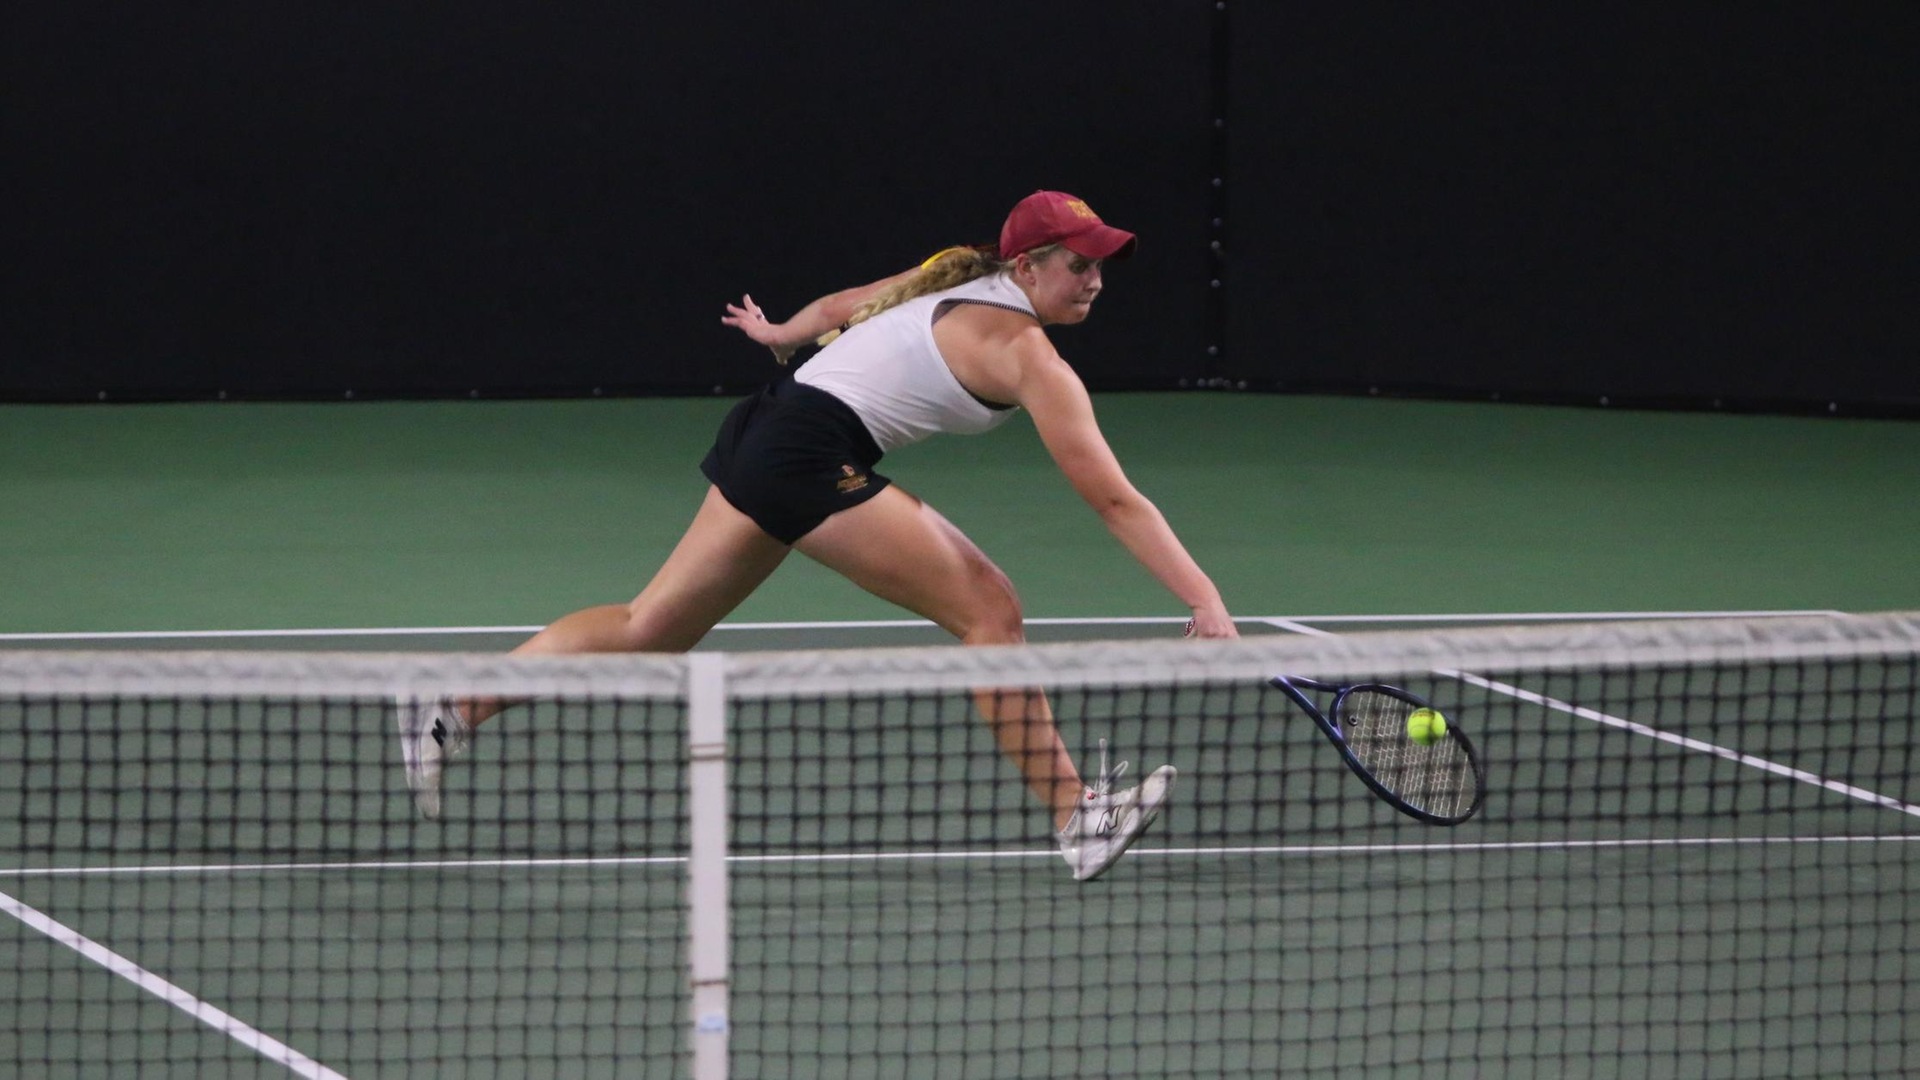 Katherine Wurster earned the clinching win in the Westcliff match